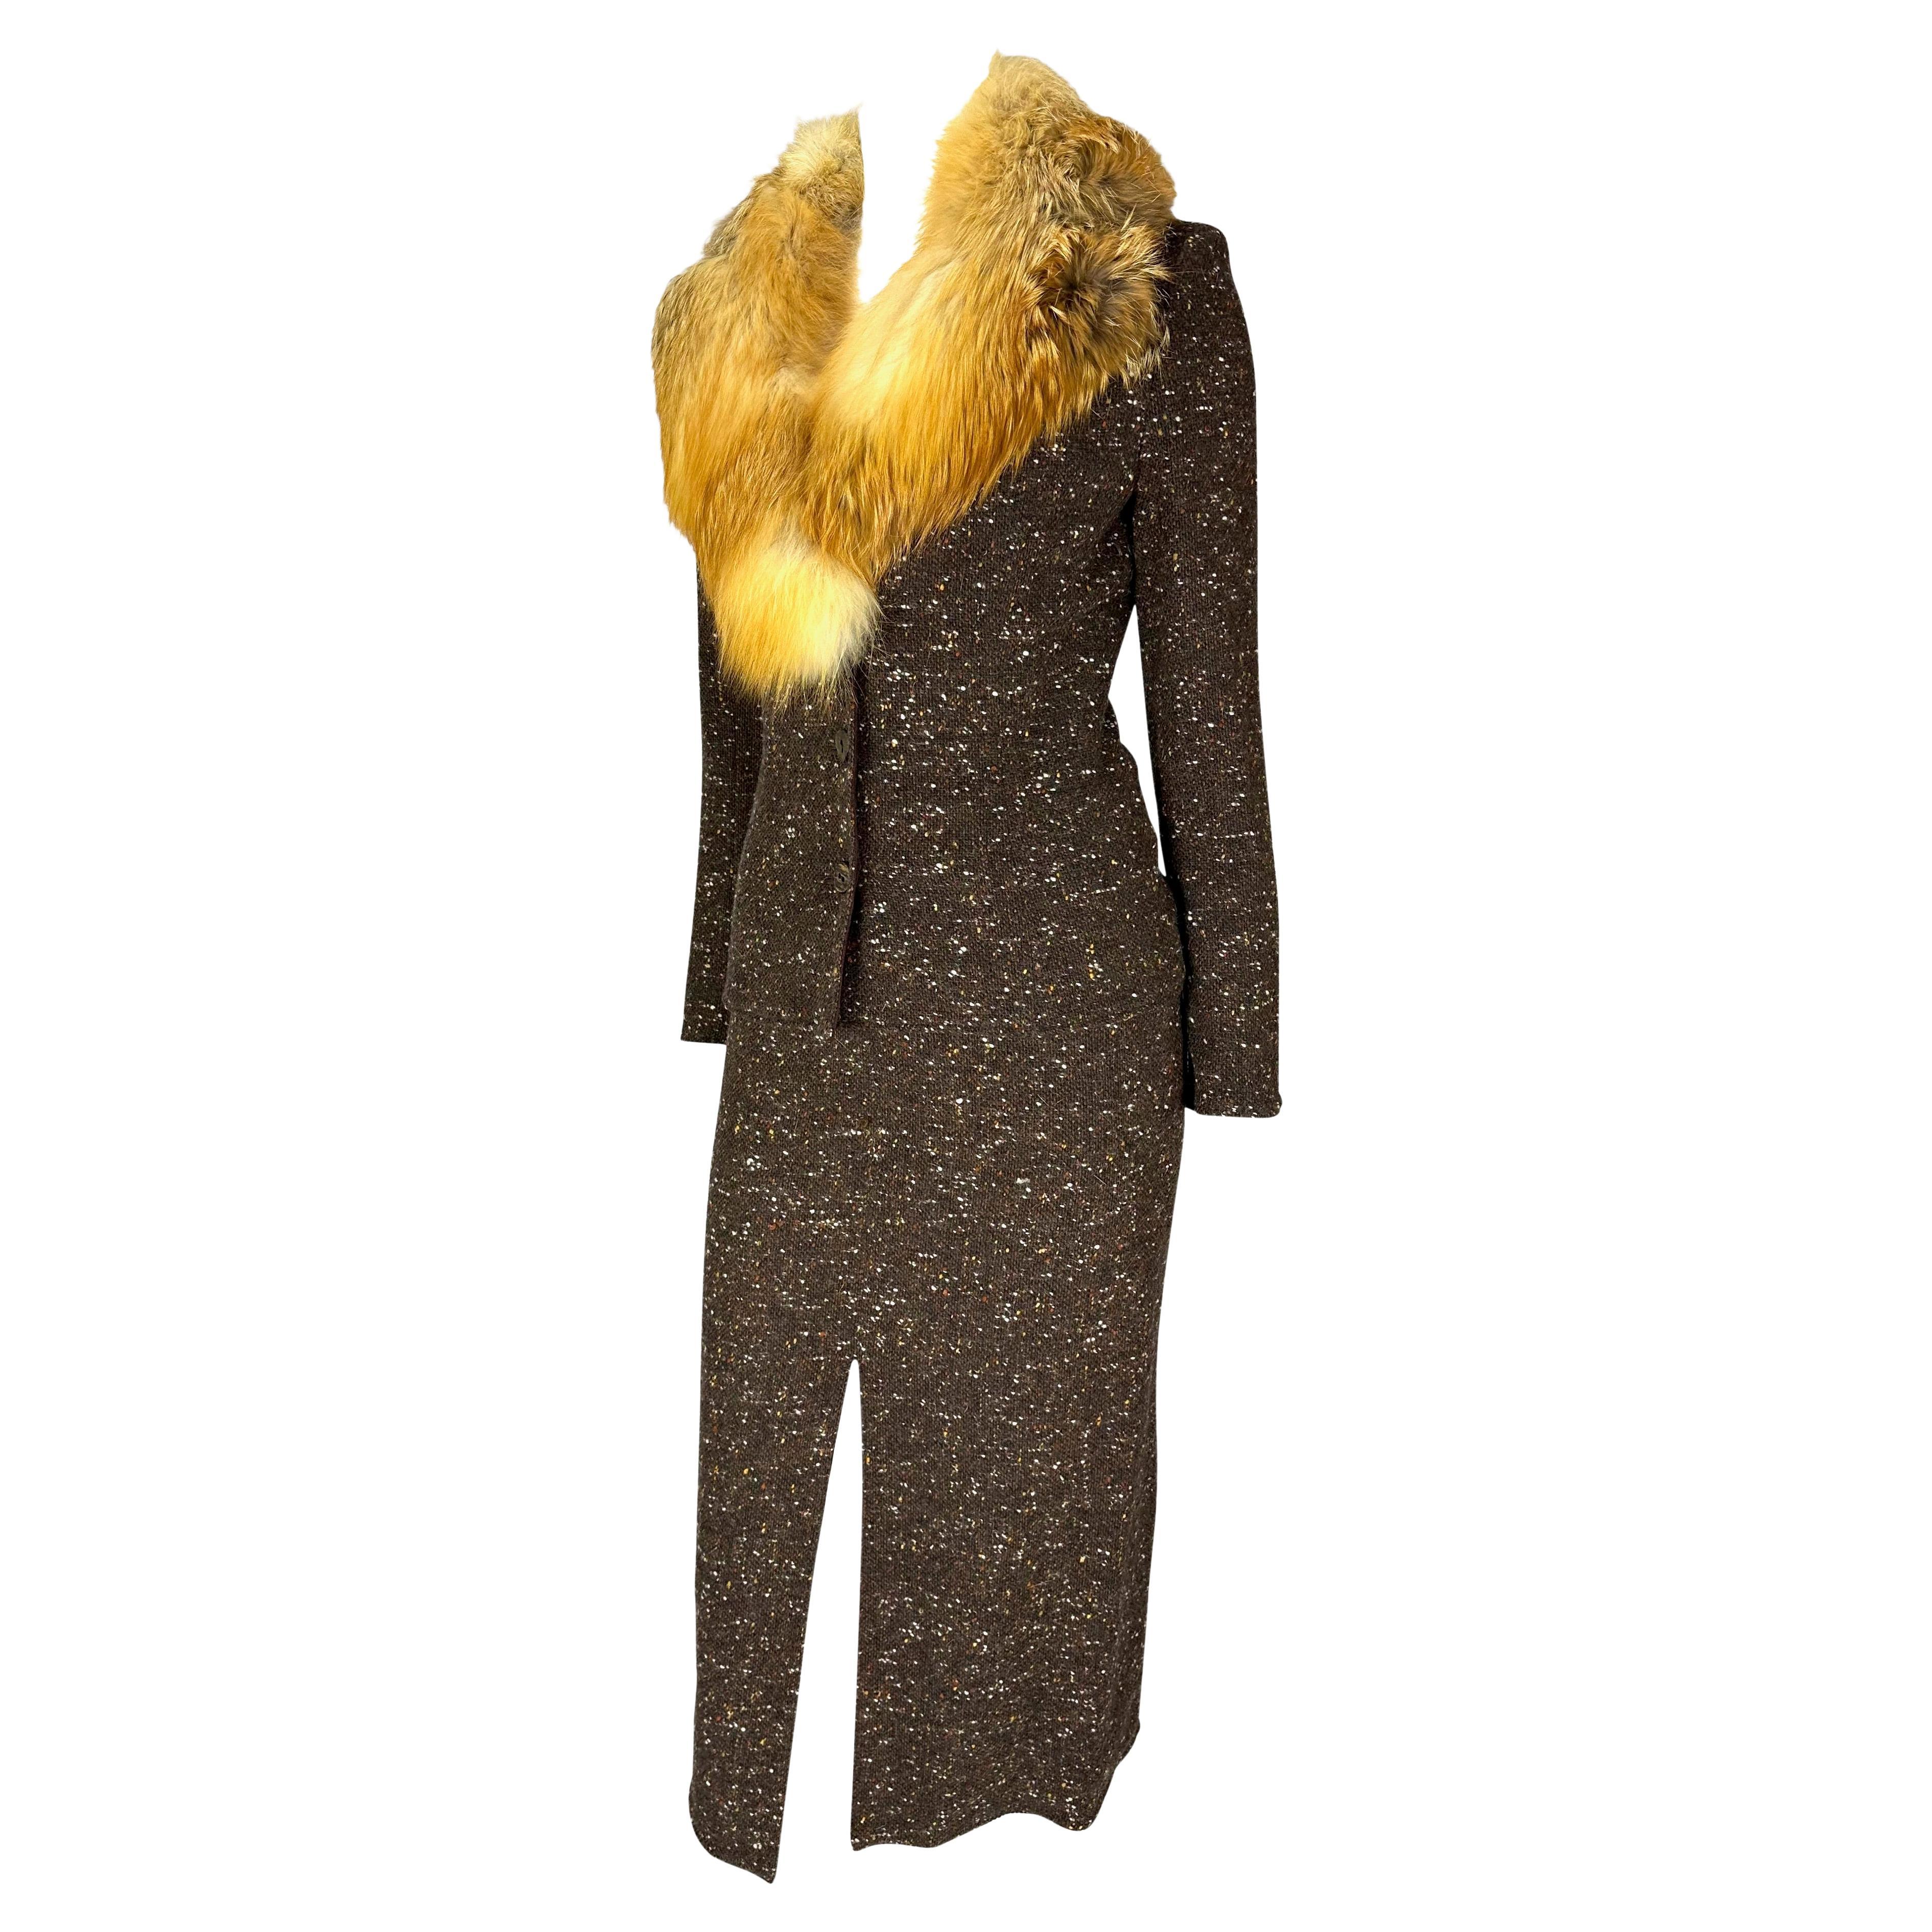 Presenting a beautiful brown tweed Christian Dior Boutique skirt suit set designed by John Galliano. From the Fall/Winter 2001 collection, this set is constructed of brown tweed and is lined in micosuede. This fabulous set is made complete with a